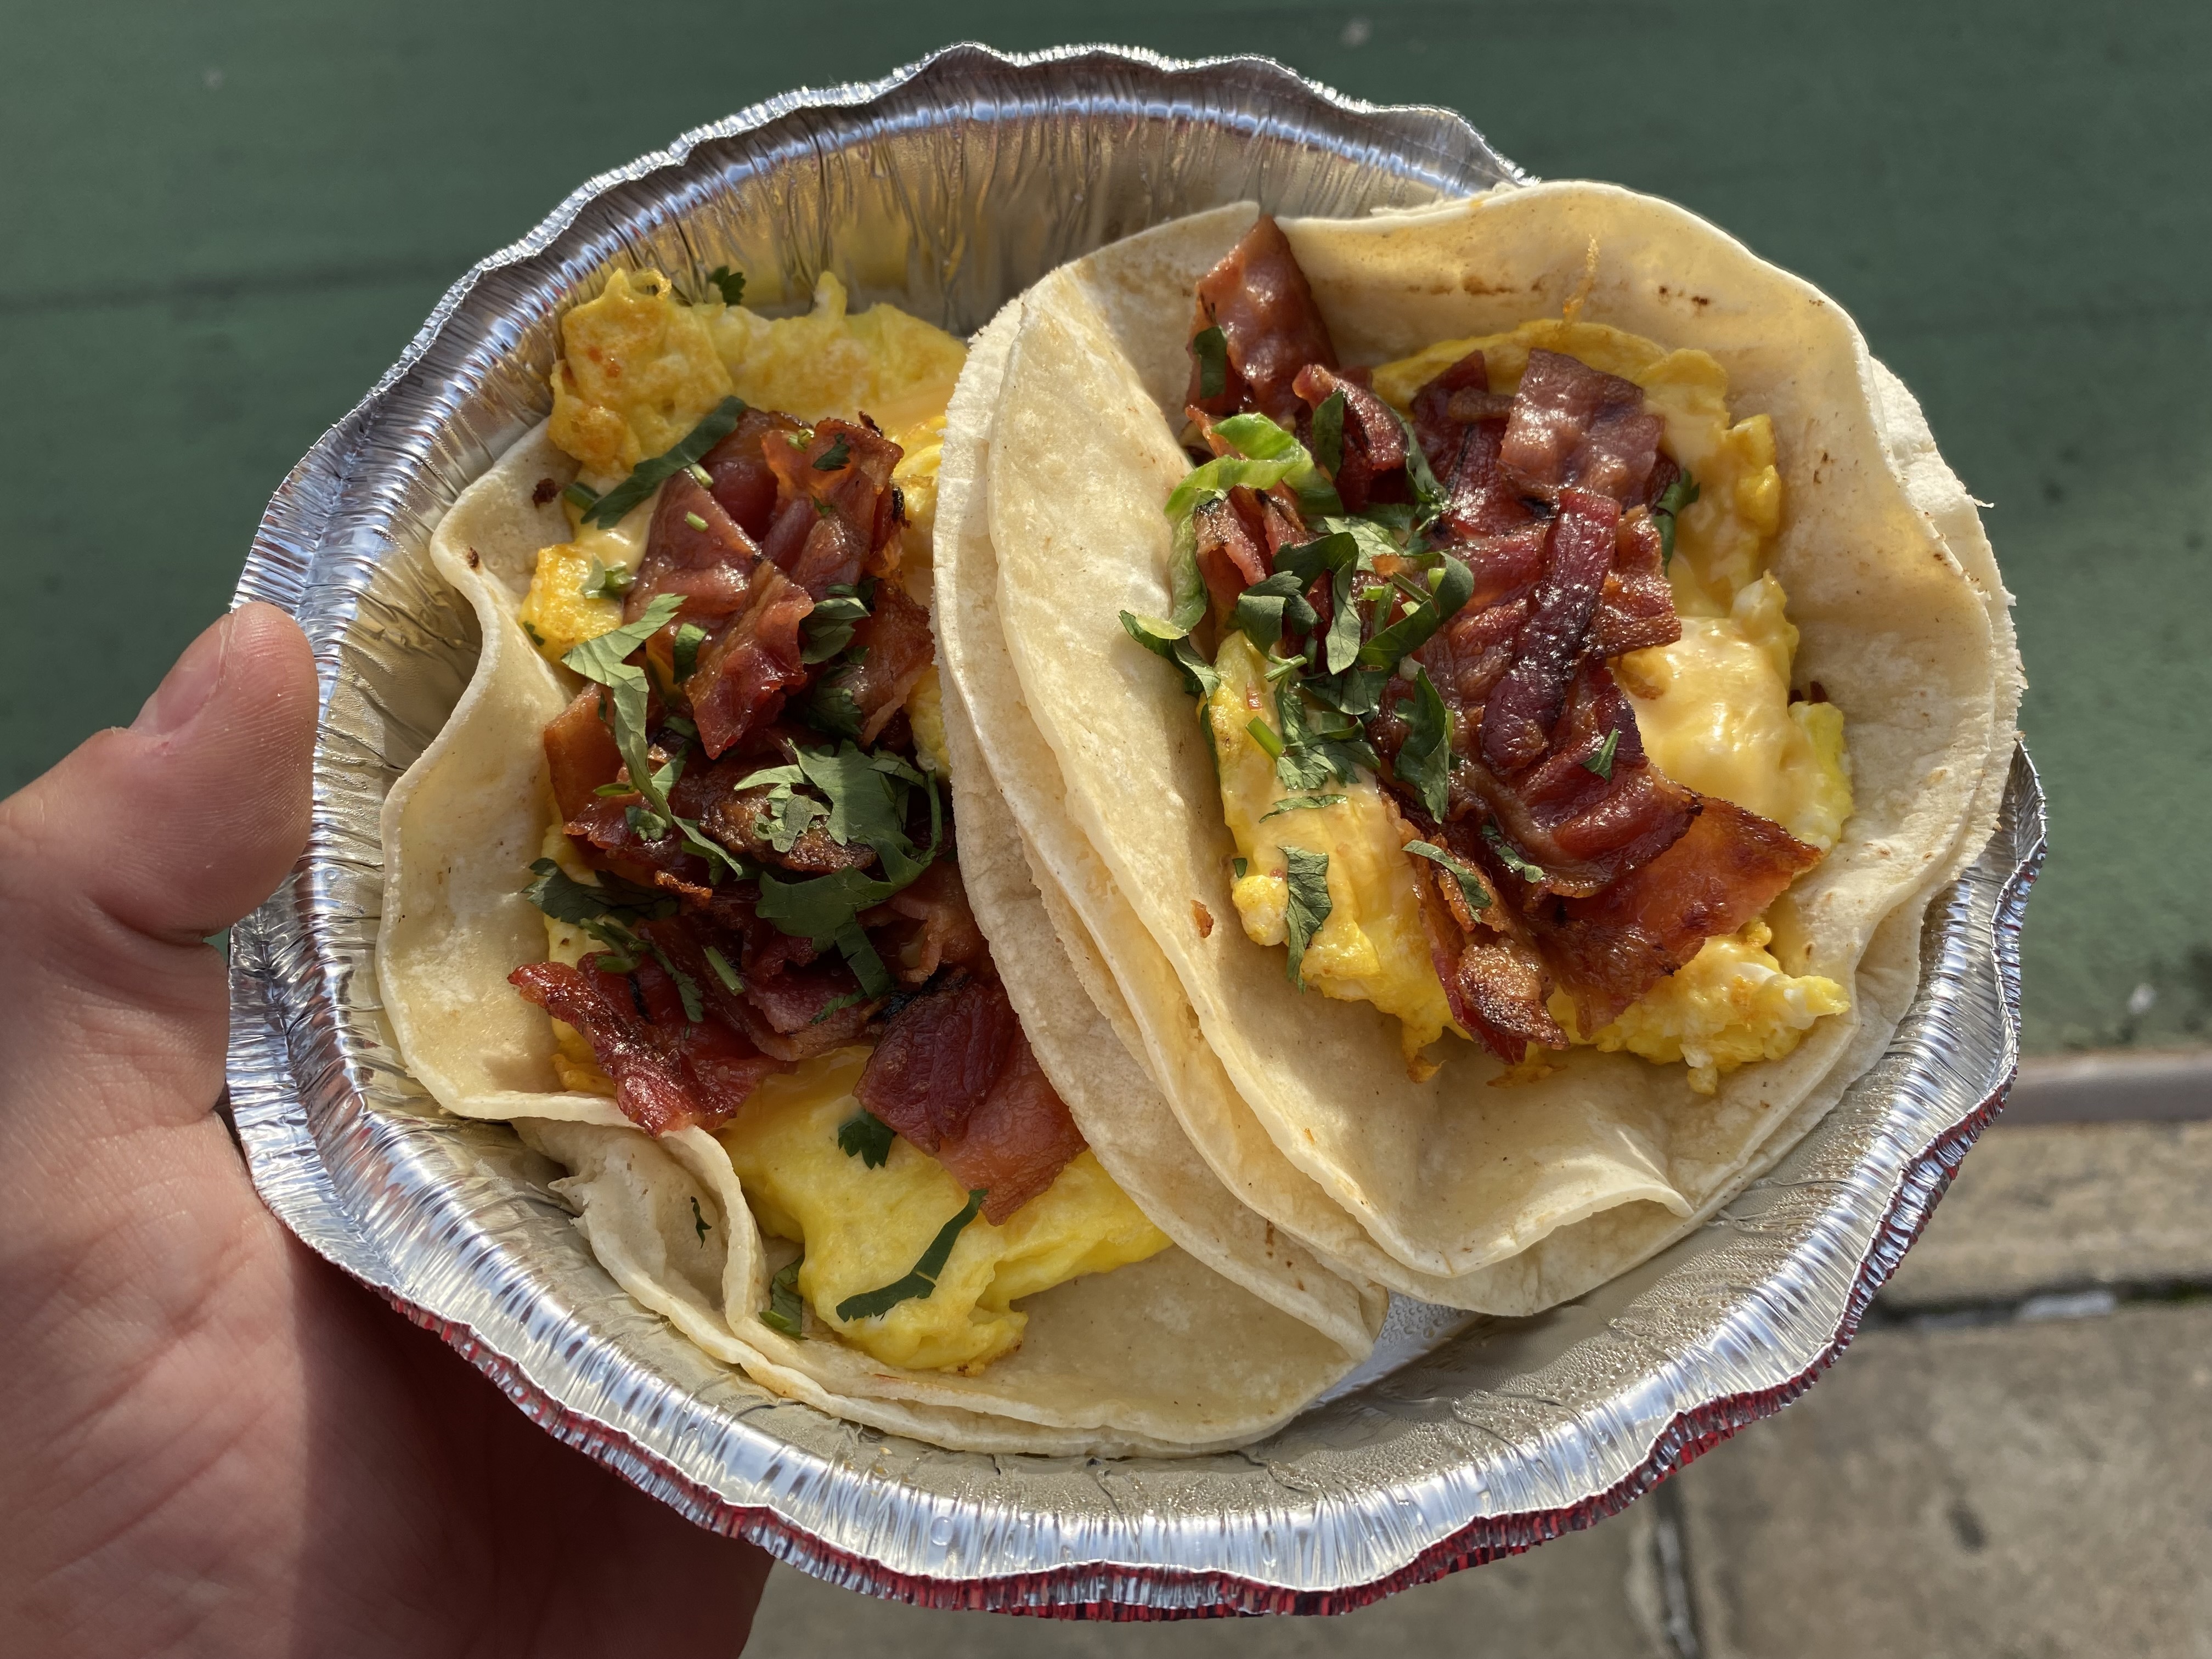 A hand holding a foil container with two tacos stuffed with bacon, egg, and cheese.